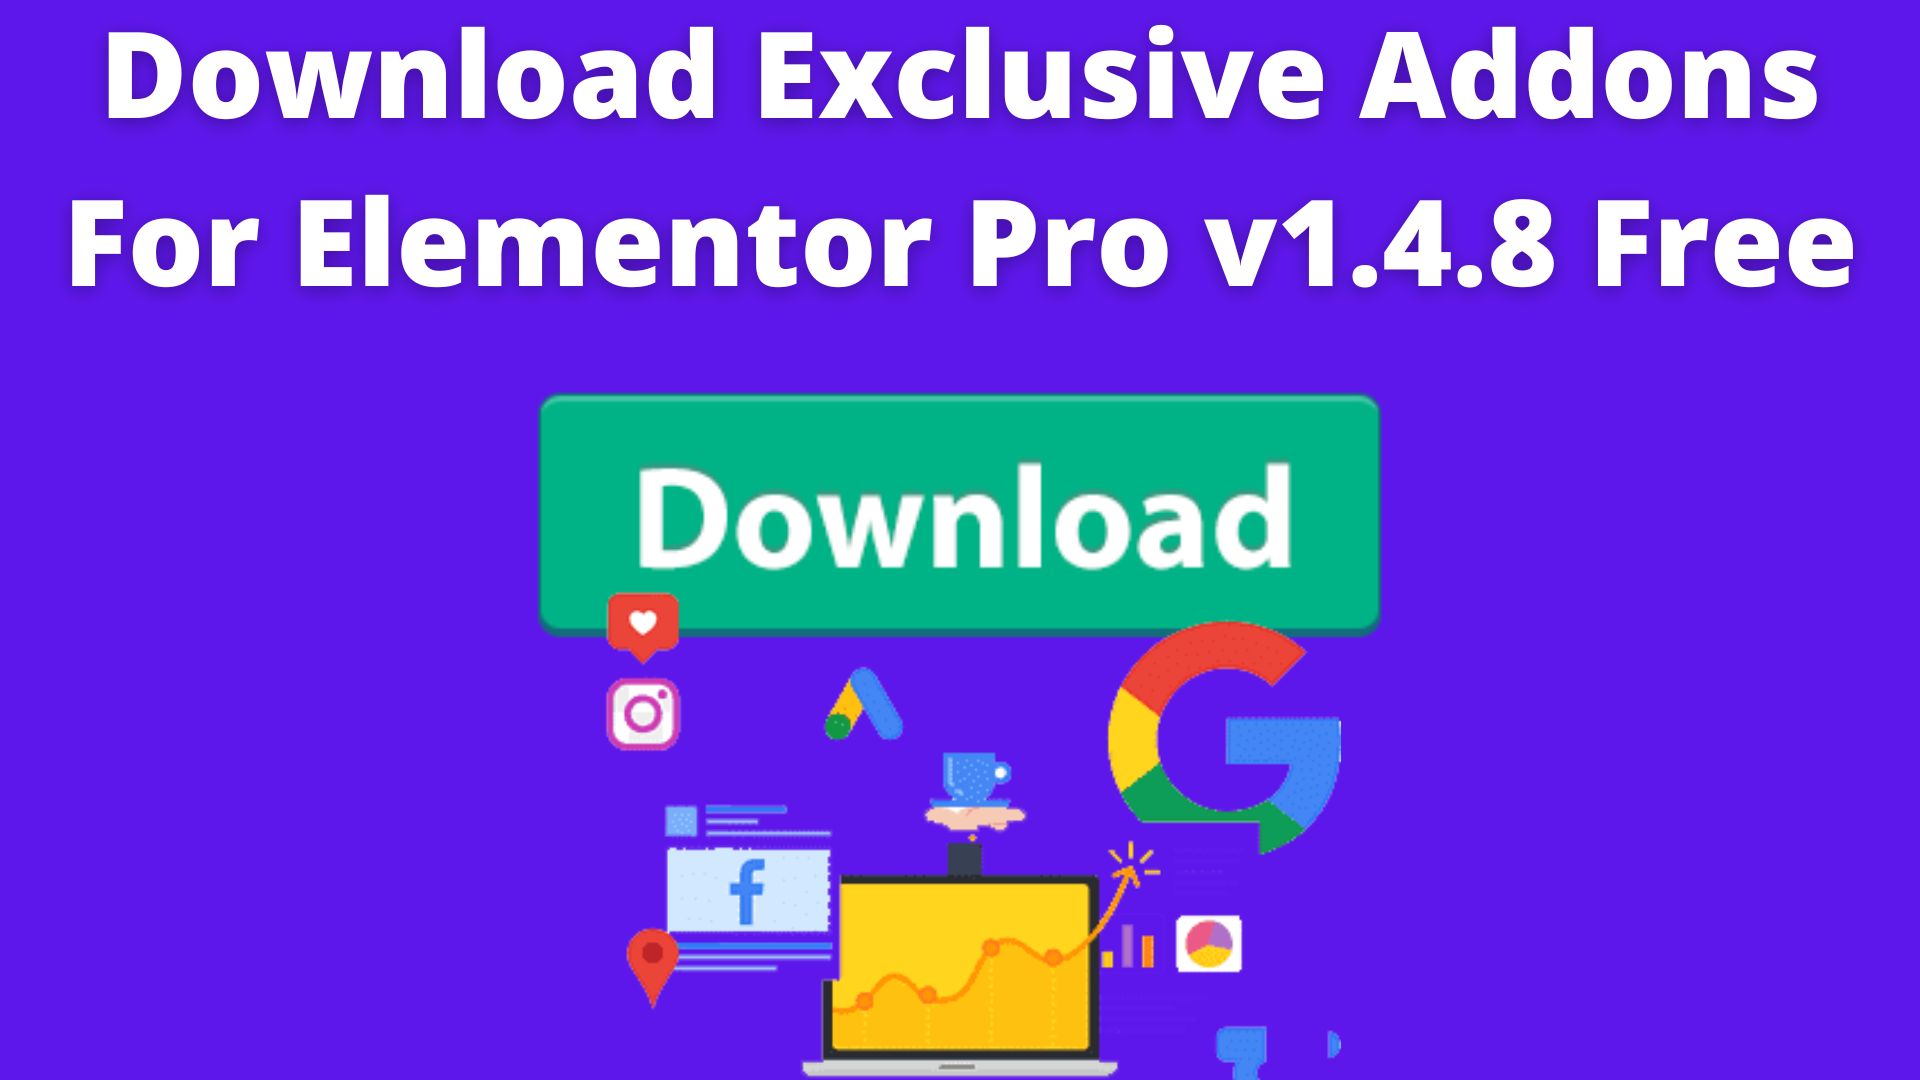 Download exclusive addons for elementor pro v1. 4. 8 free